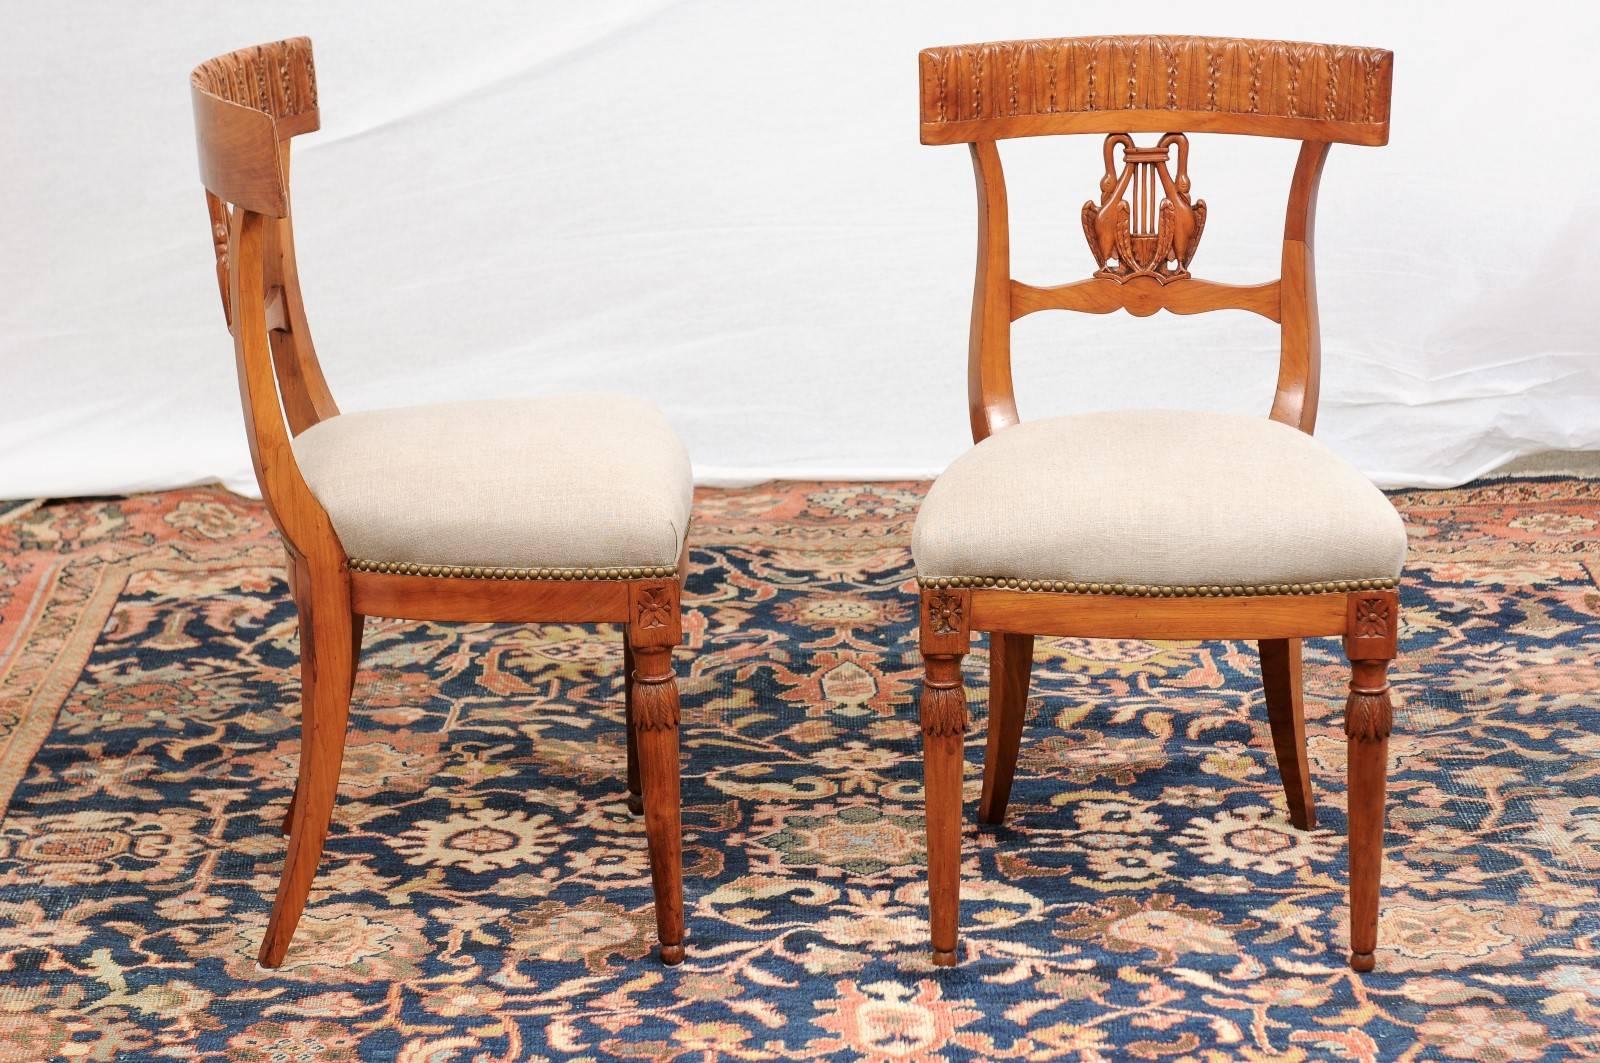 Pair of Italian Neoclassical Side Chairs with Swans and Lyre from the 1850s For Sale 1